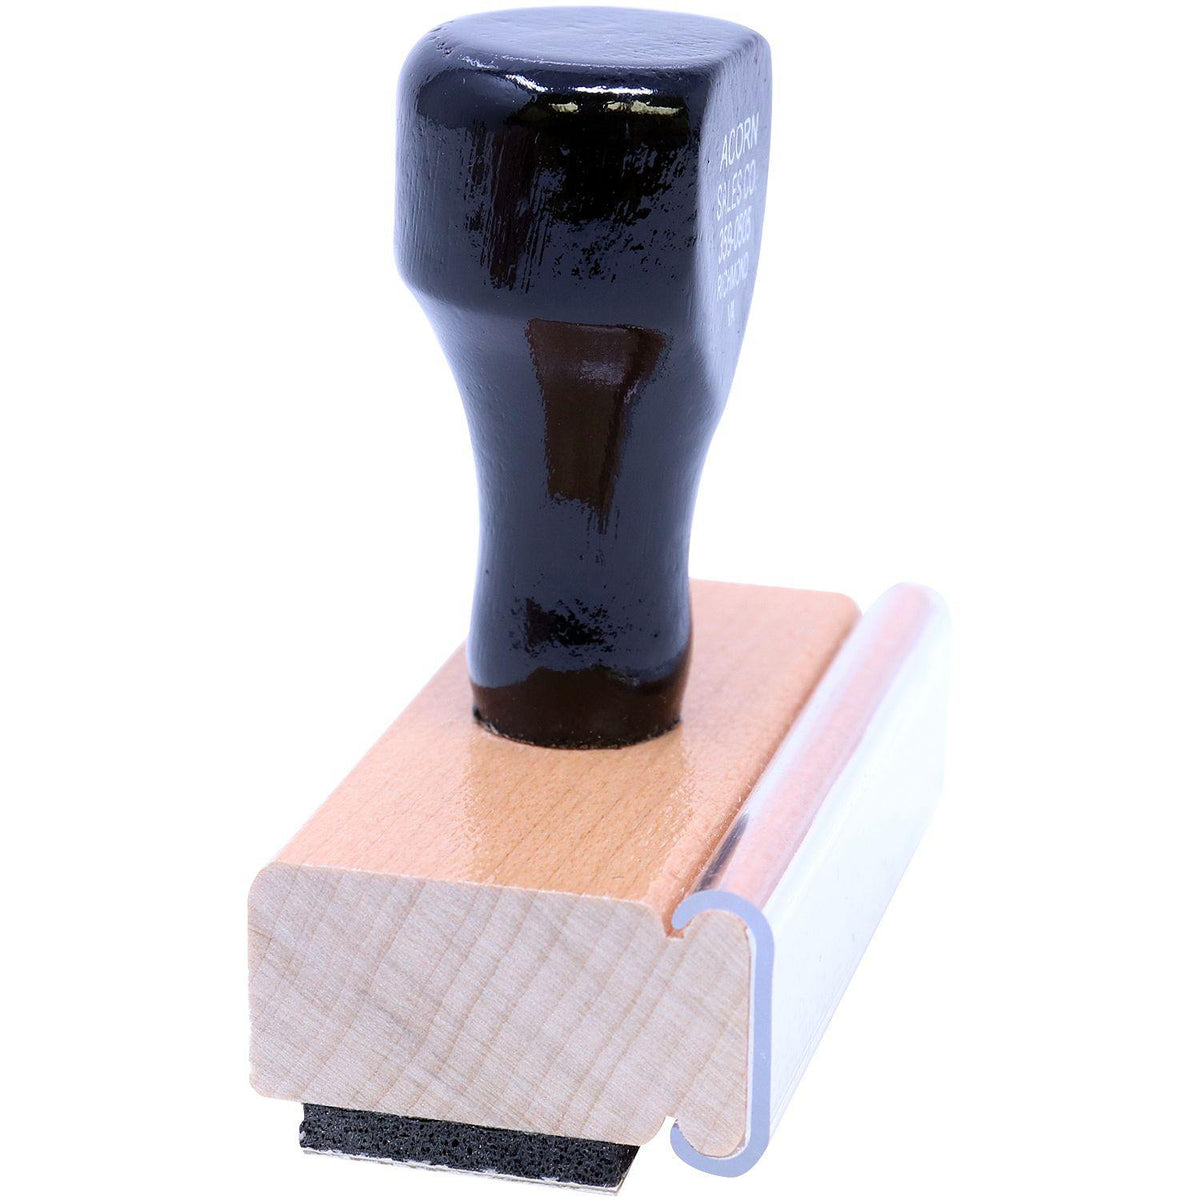 Large Trustee Exhibit Rubber Stamp - Engineer Seal Stamps - Brand_Acorn, Impression Size_Large, Stamp Type_Regular Stamp, Type of Use_Legal